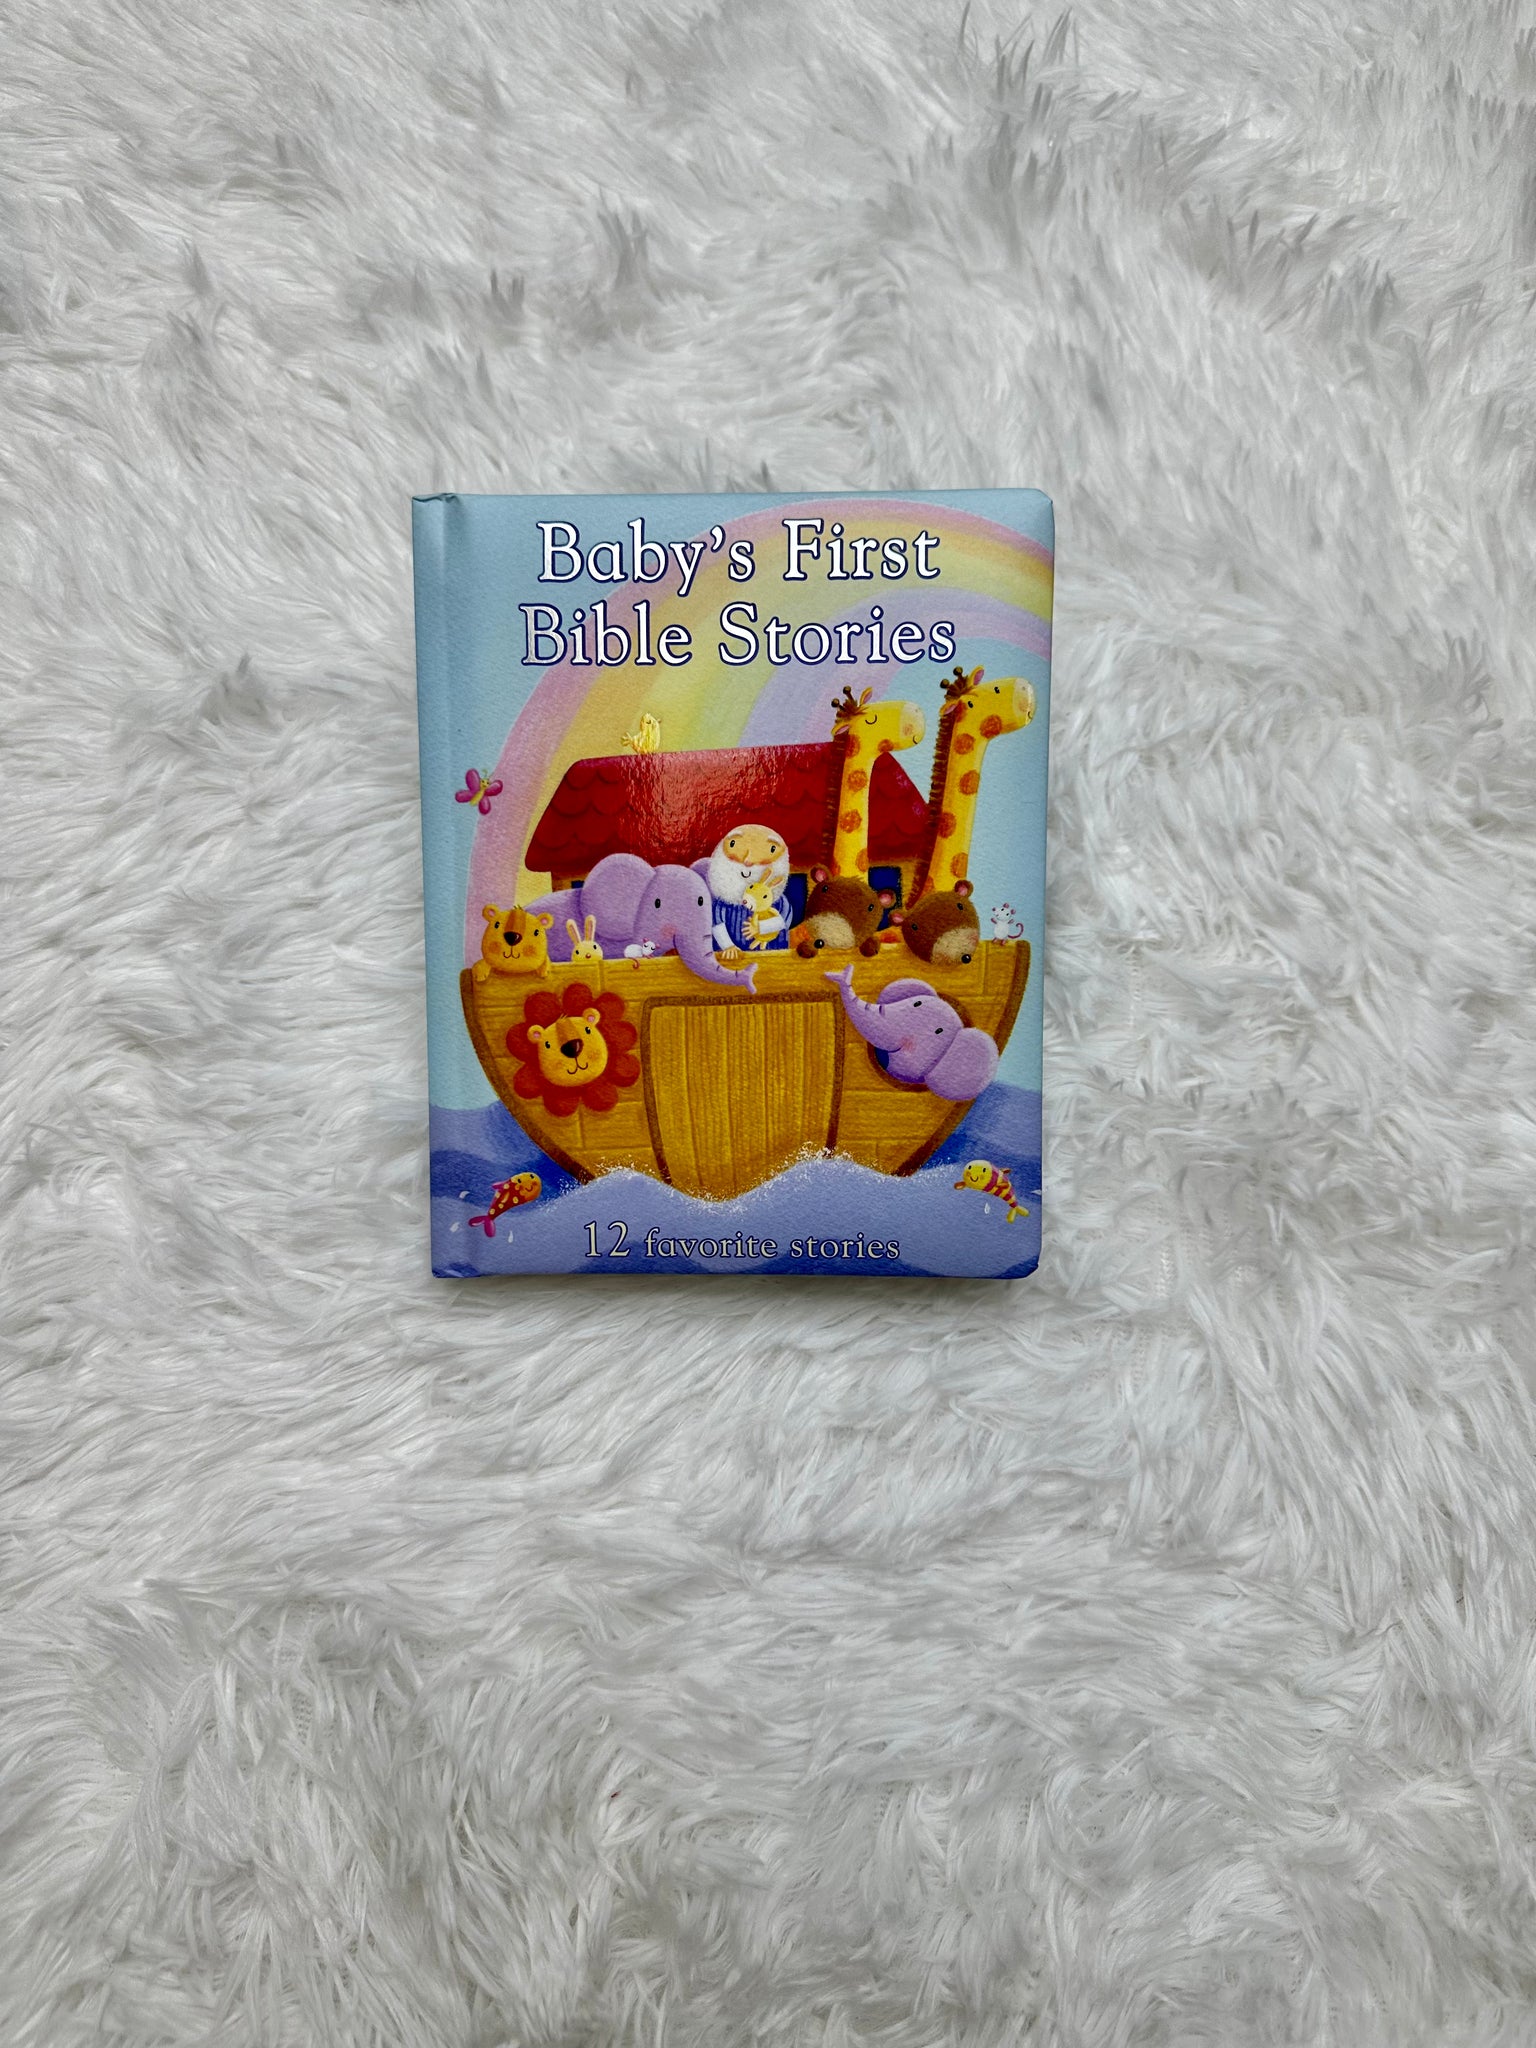 Baby's First Bible Stories book